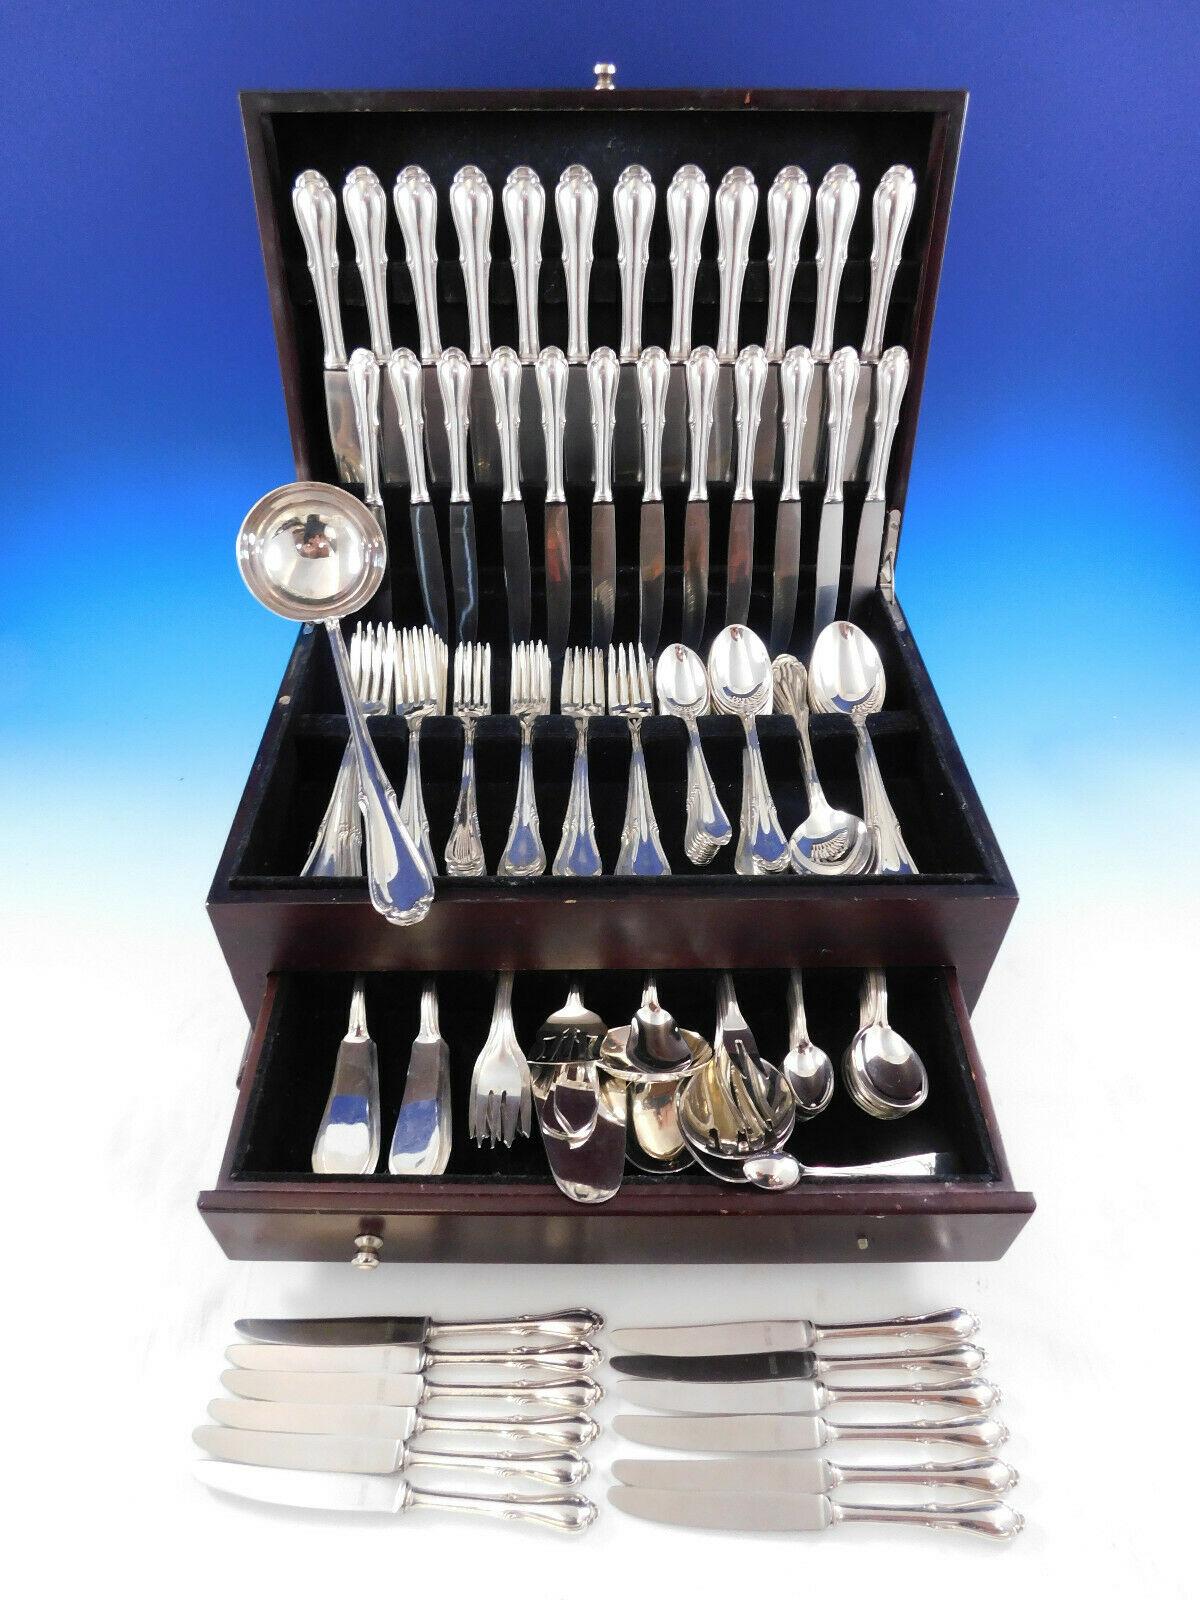 Outstanding monumental Sterling Silver German flatware set with timeless design - 170 pieces. This set includes:

12 dinner knives, 9 1/4